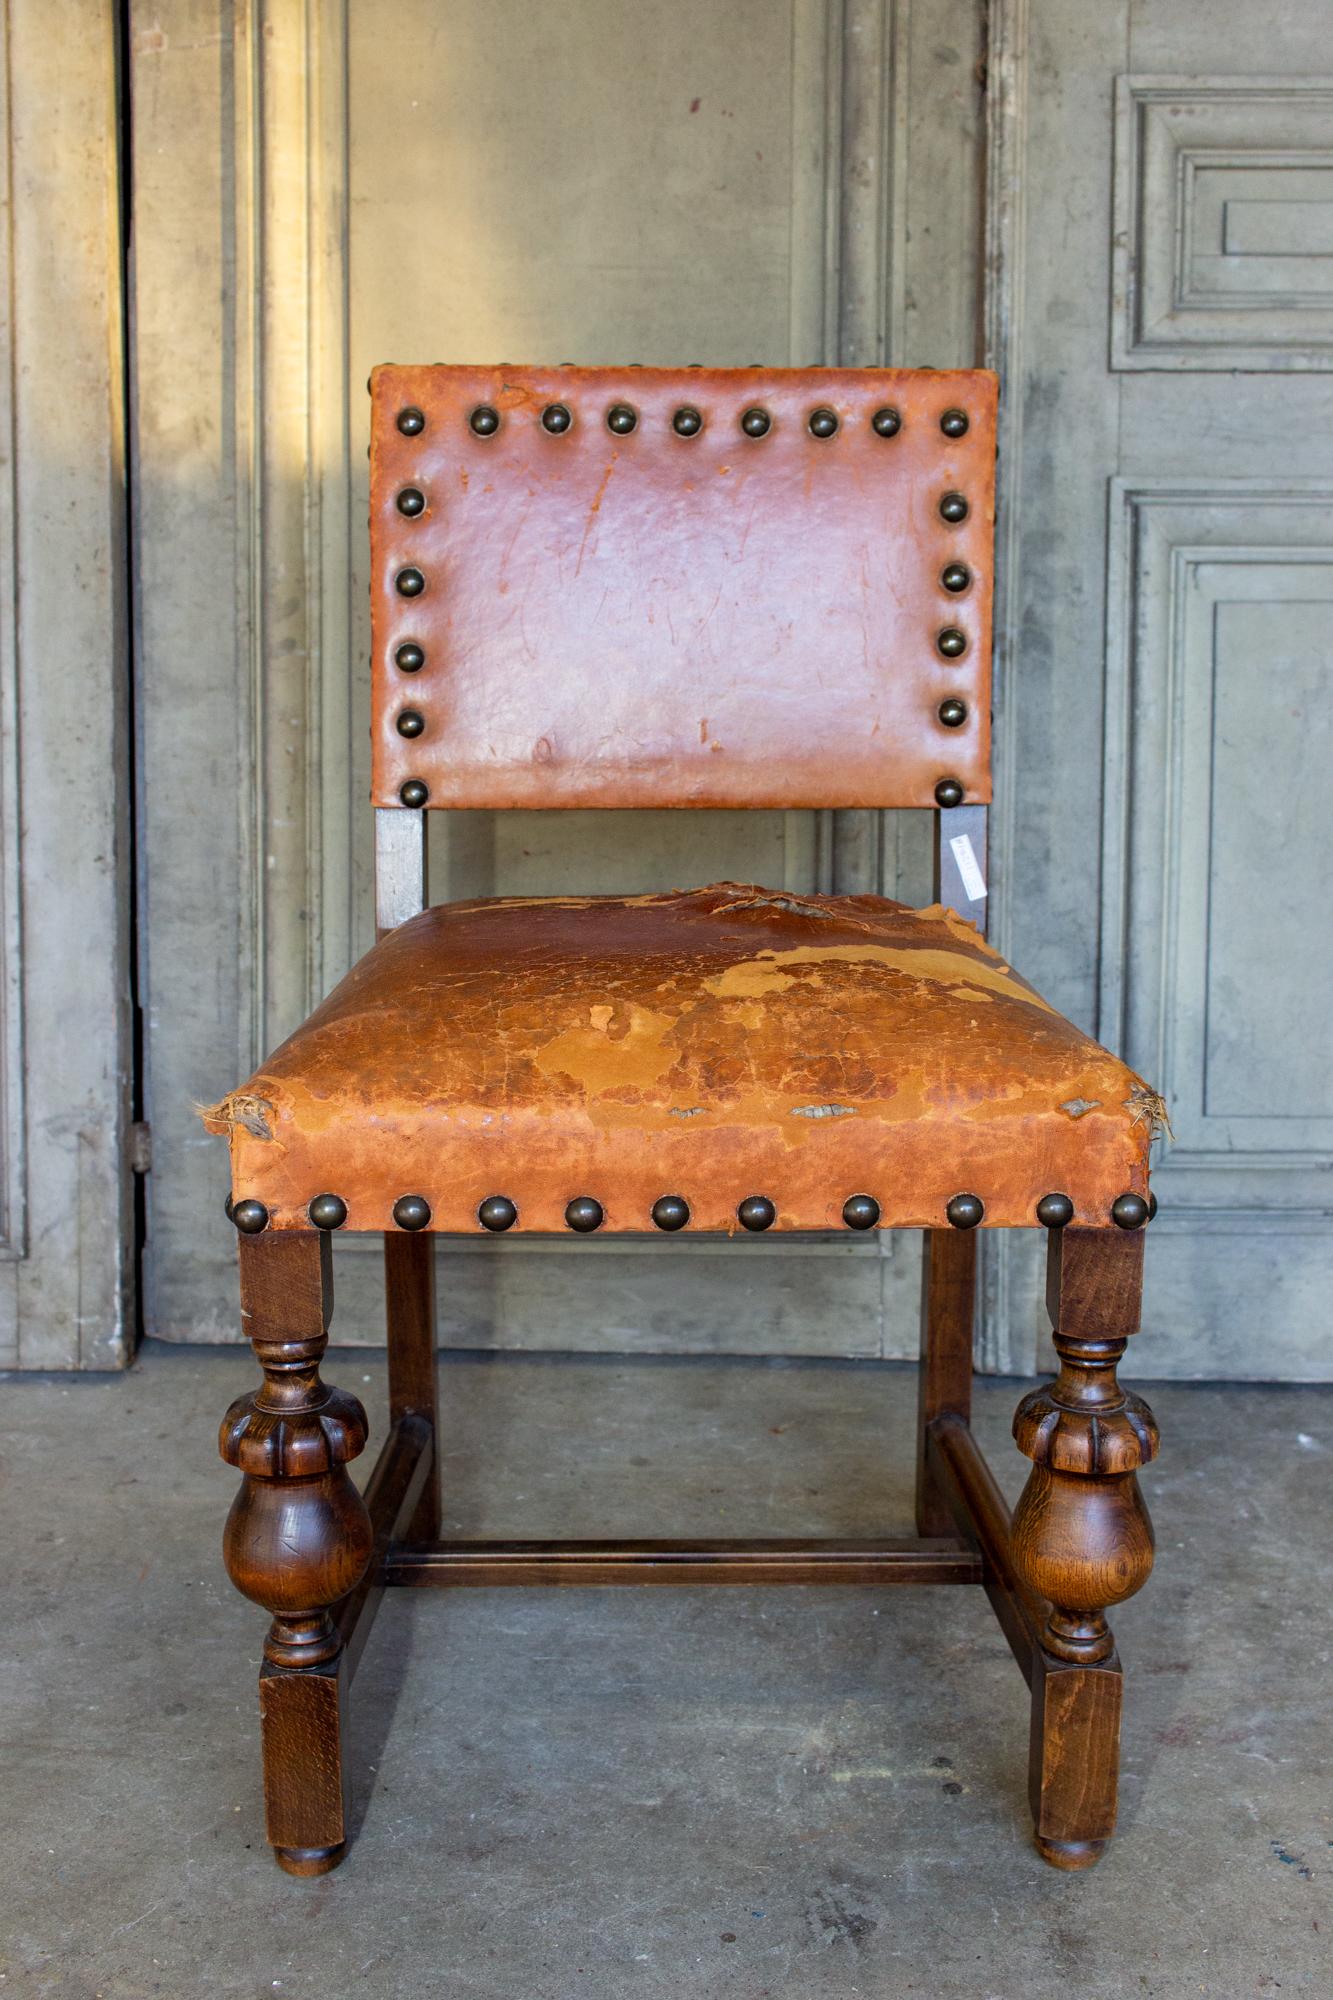 This is an antique Spanish wood & leather chair with beautiful carvings in the frame and patinated brass nailhead details. The leather is a rich deep cognac color and does have wear, patination and there is a tear on the seat. The oversized brass